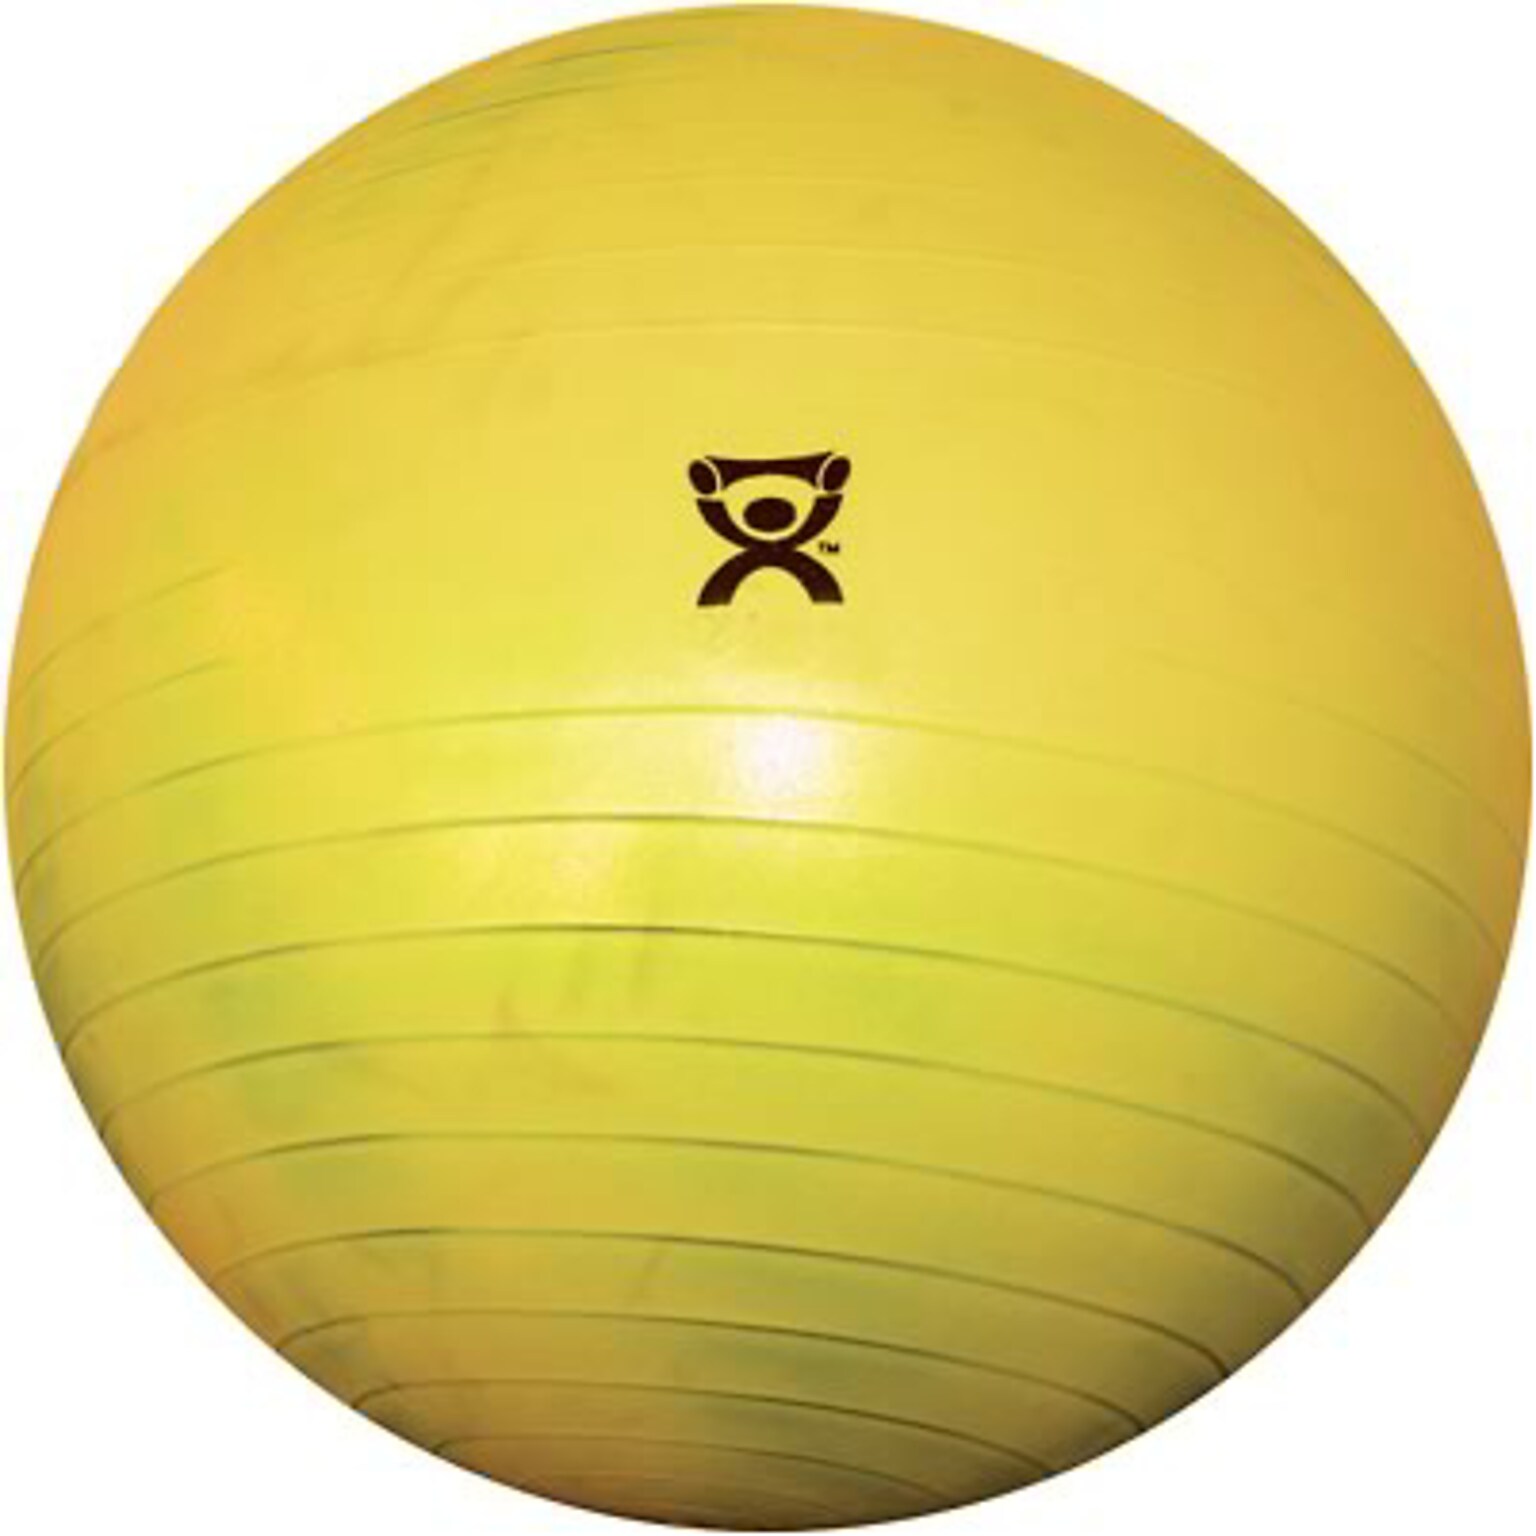 Cando® Inflatable ABS™ Exercise Ball; 45cm - 18, Yellow